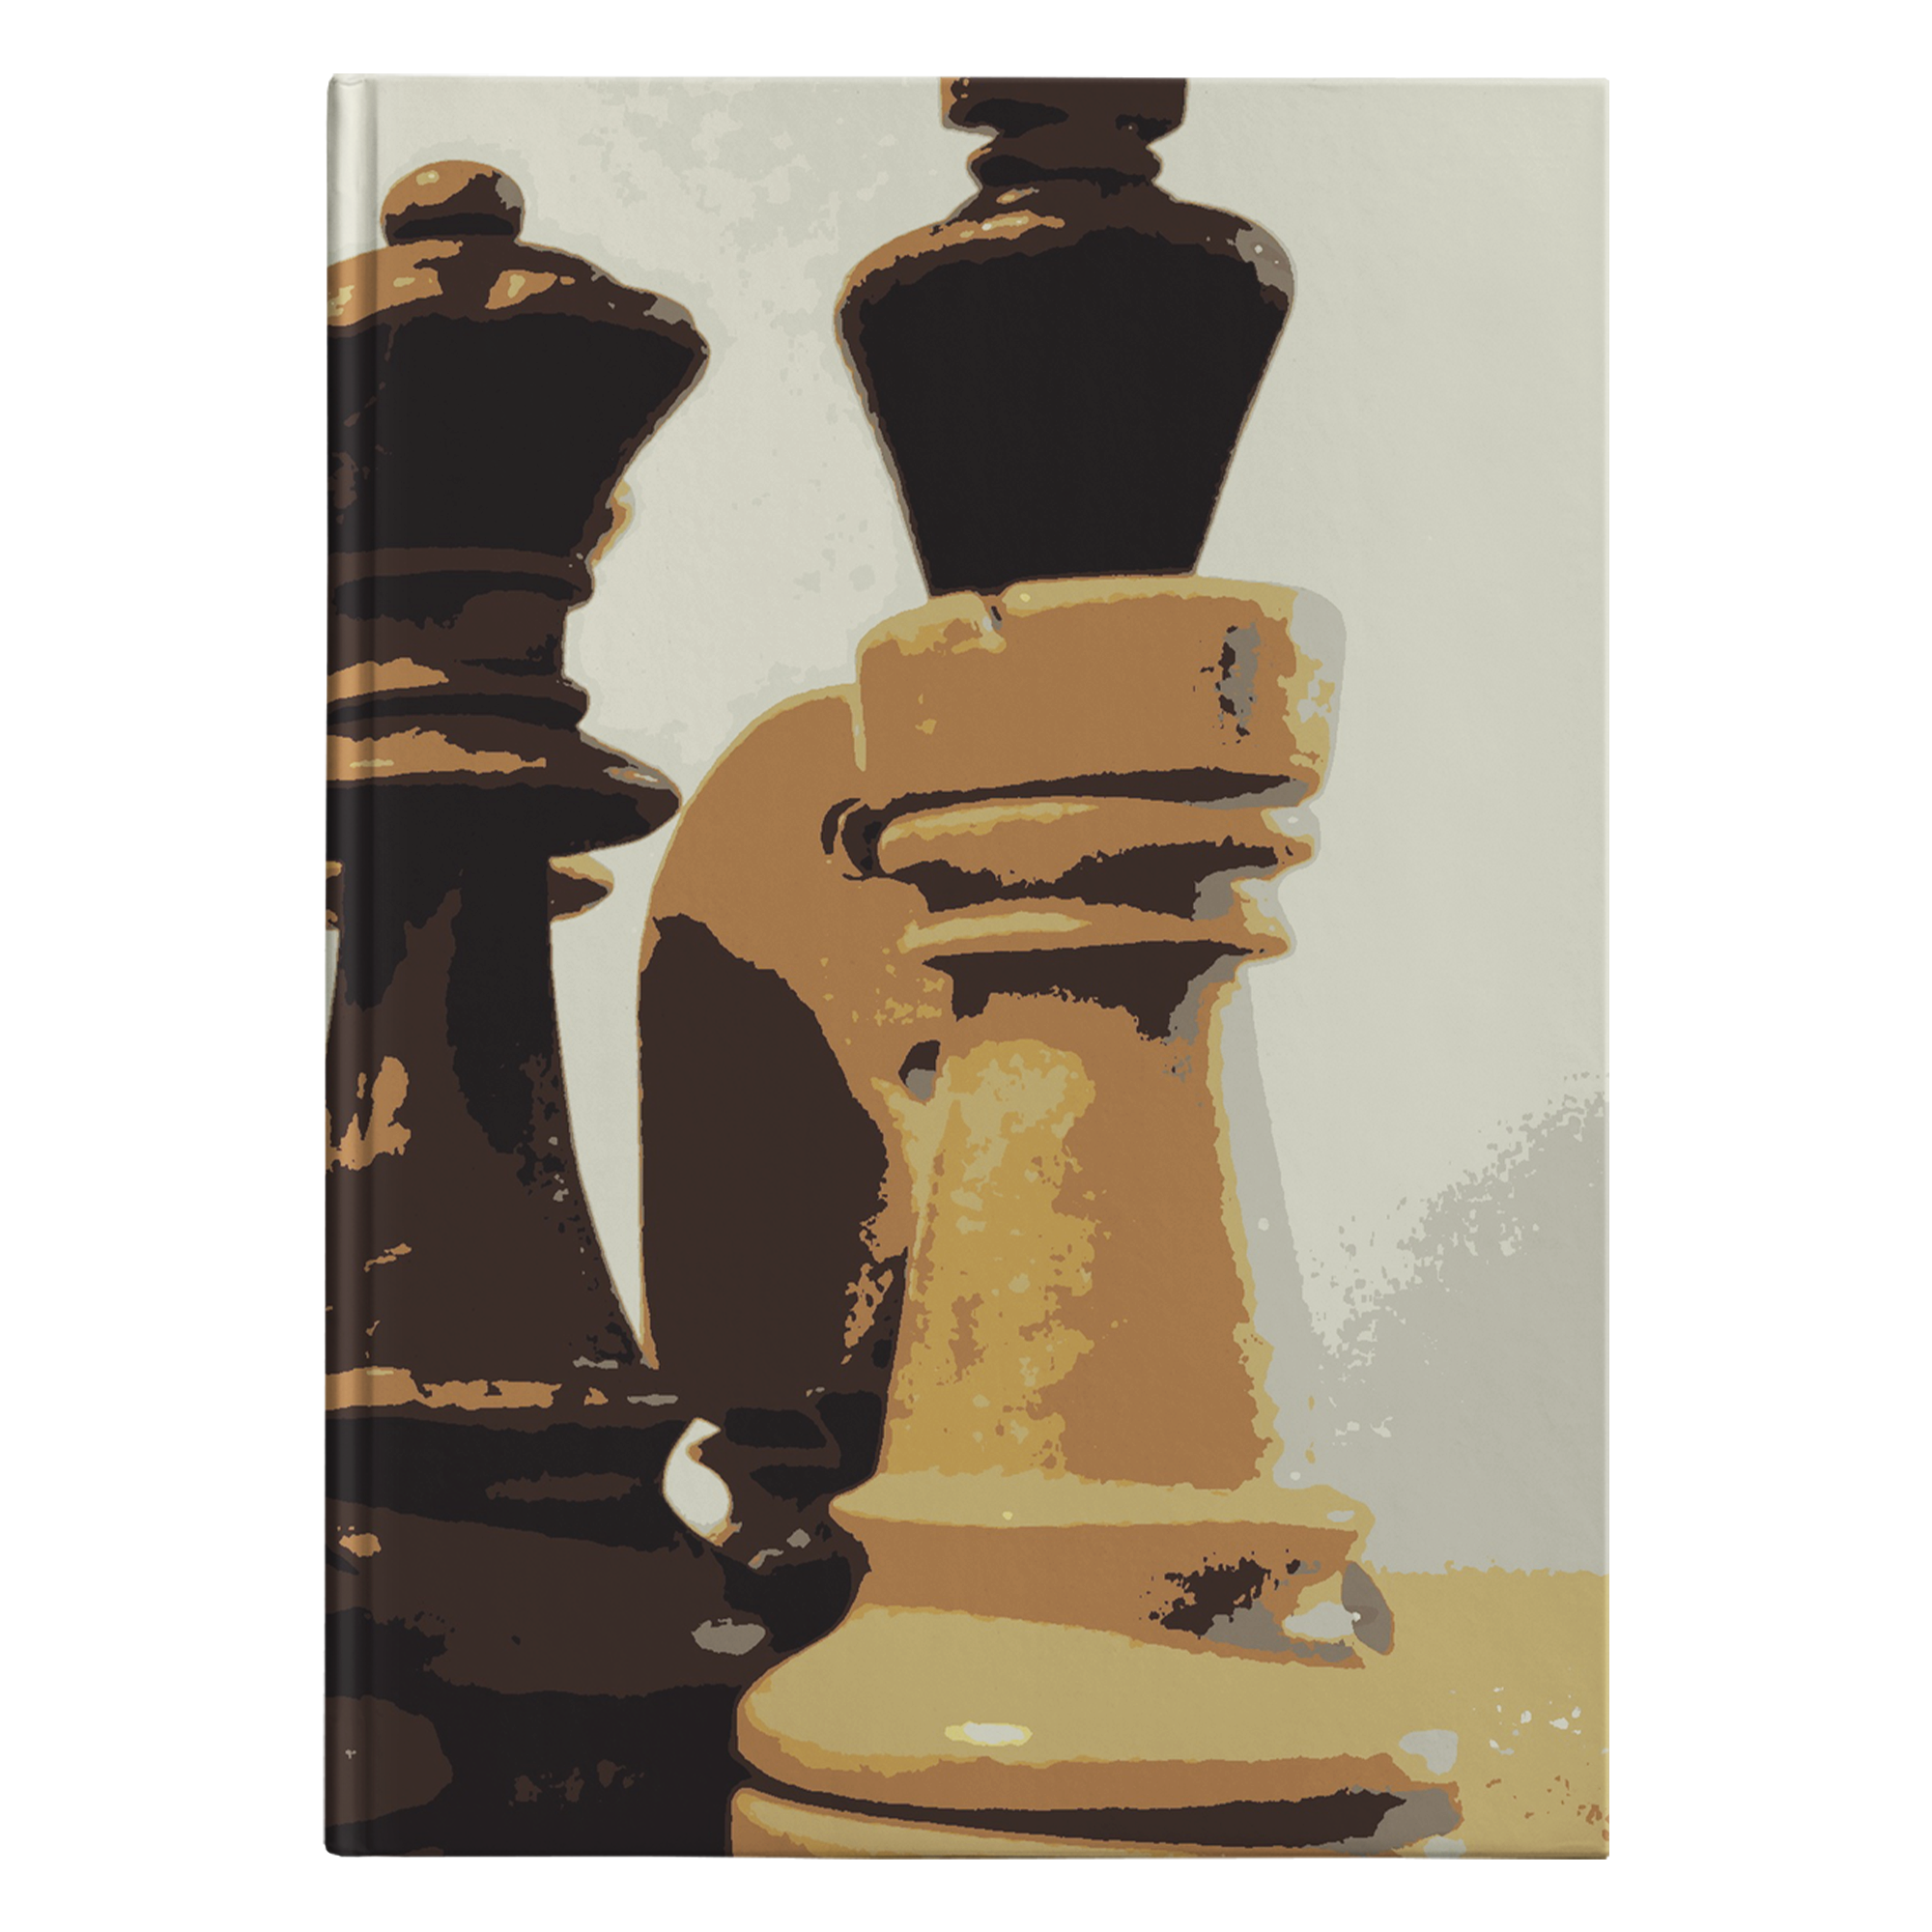 Wooden retro chess pieces hardcover journal